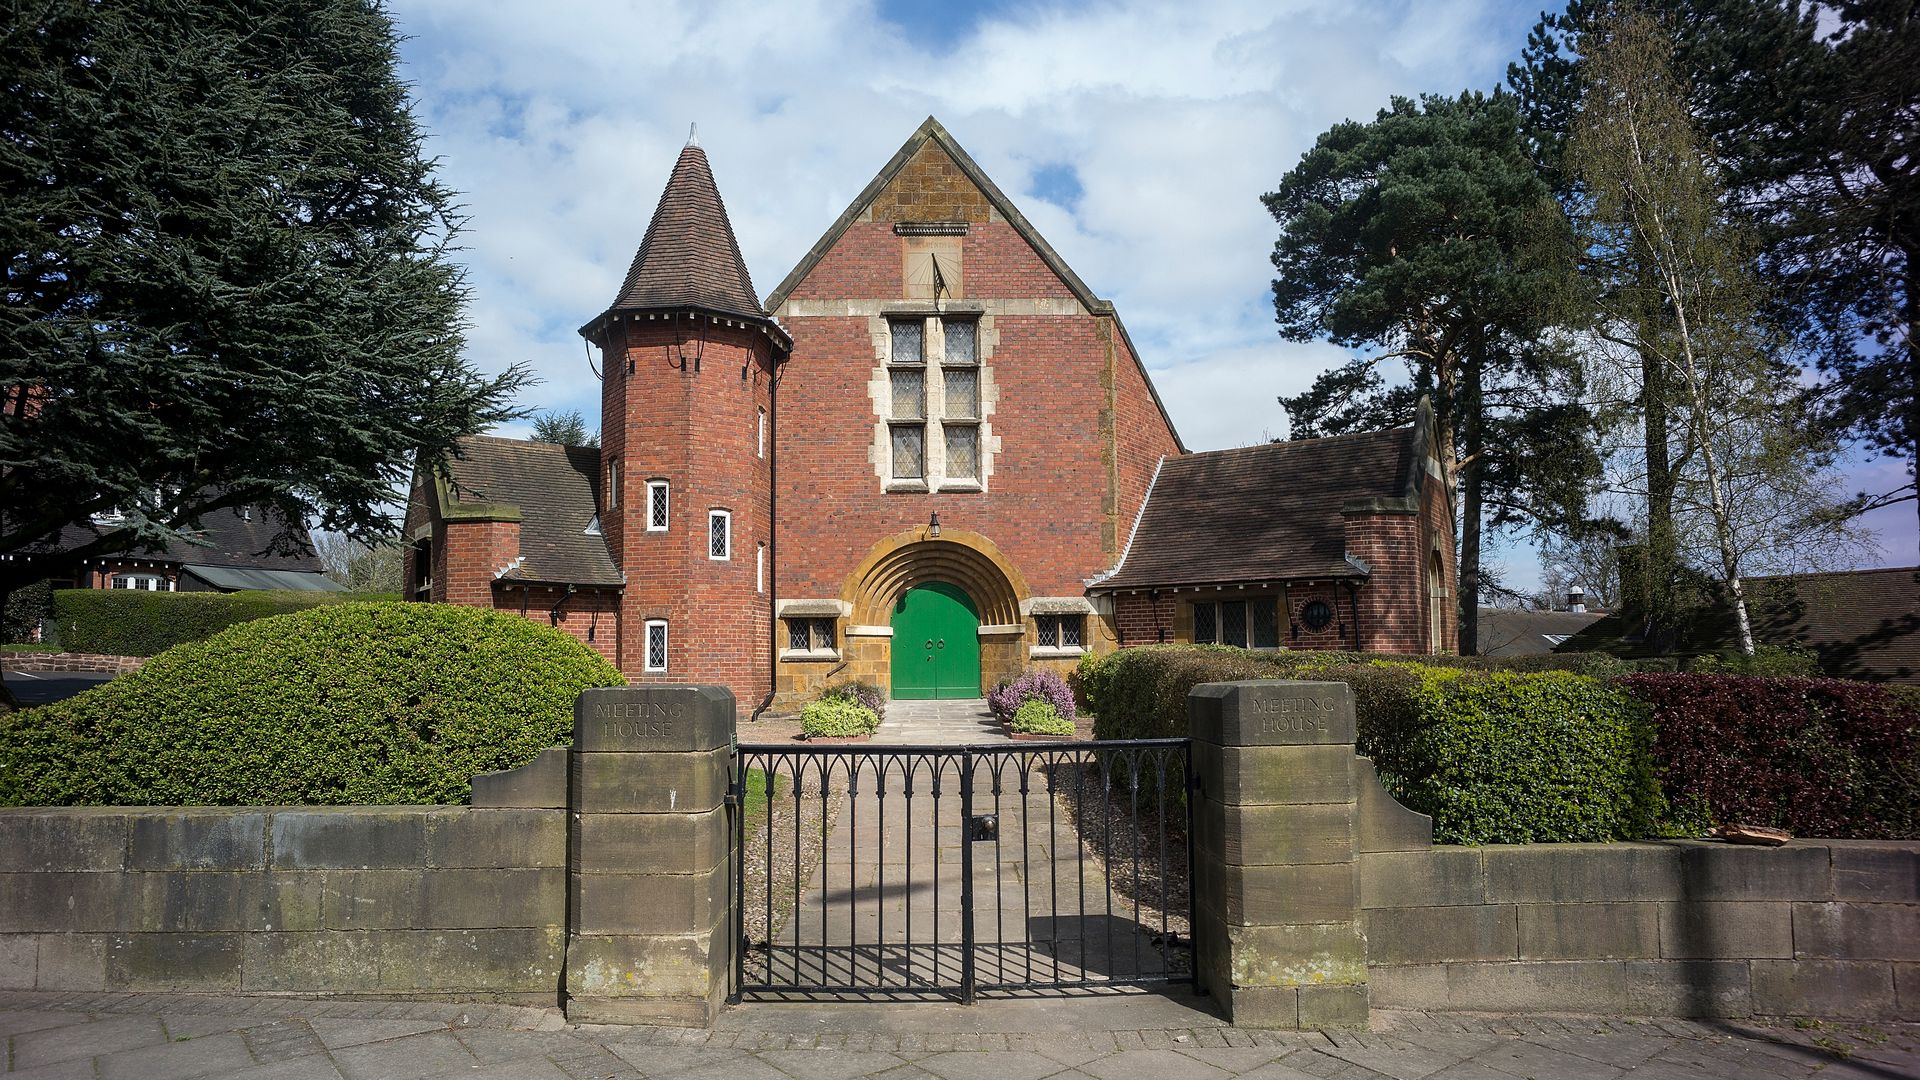 Quaker meeting house, Bournville